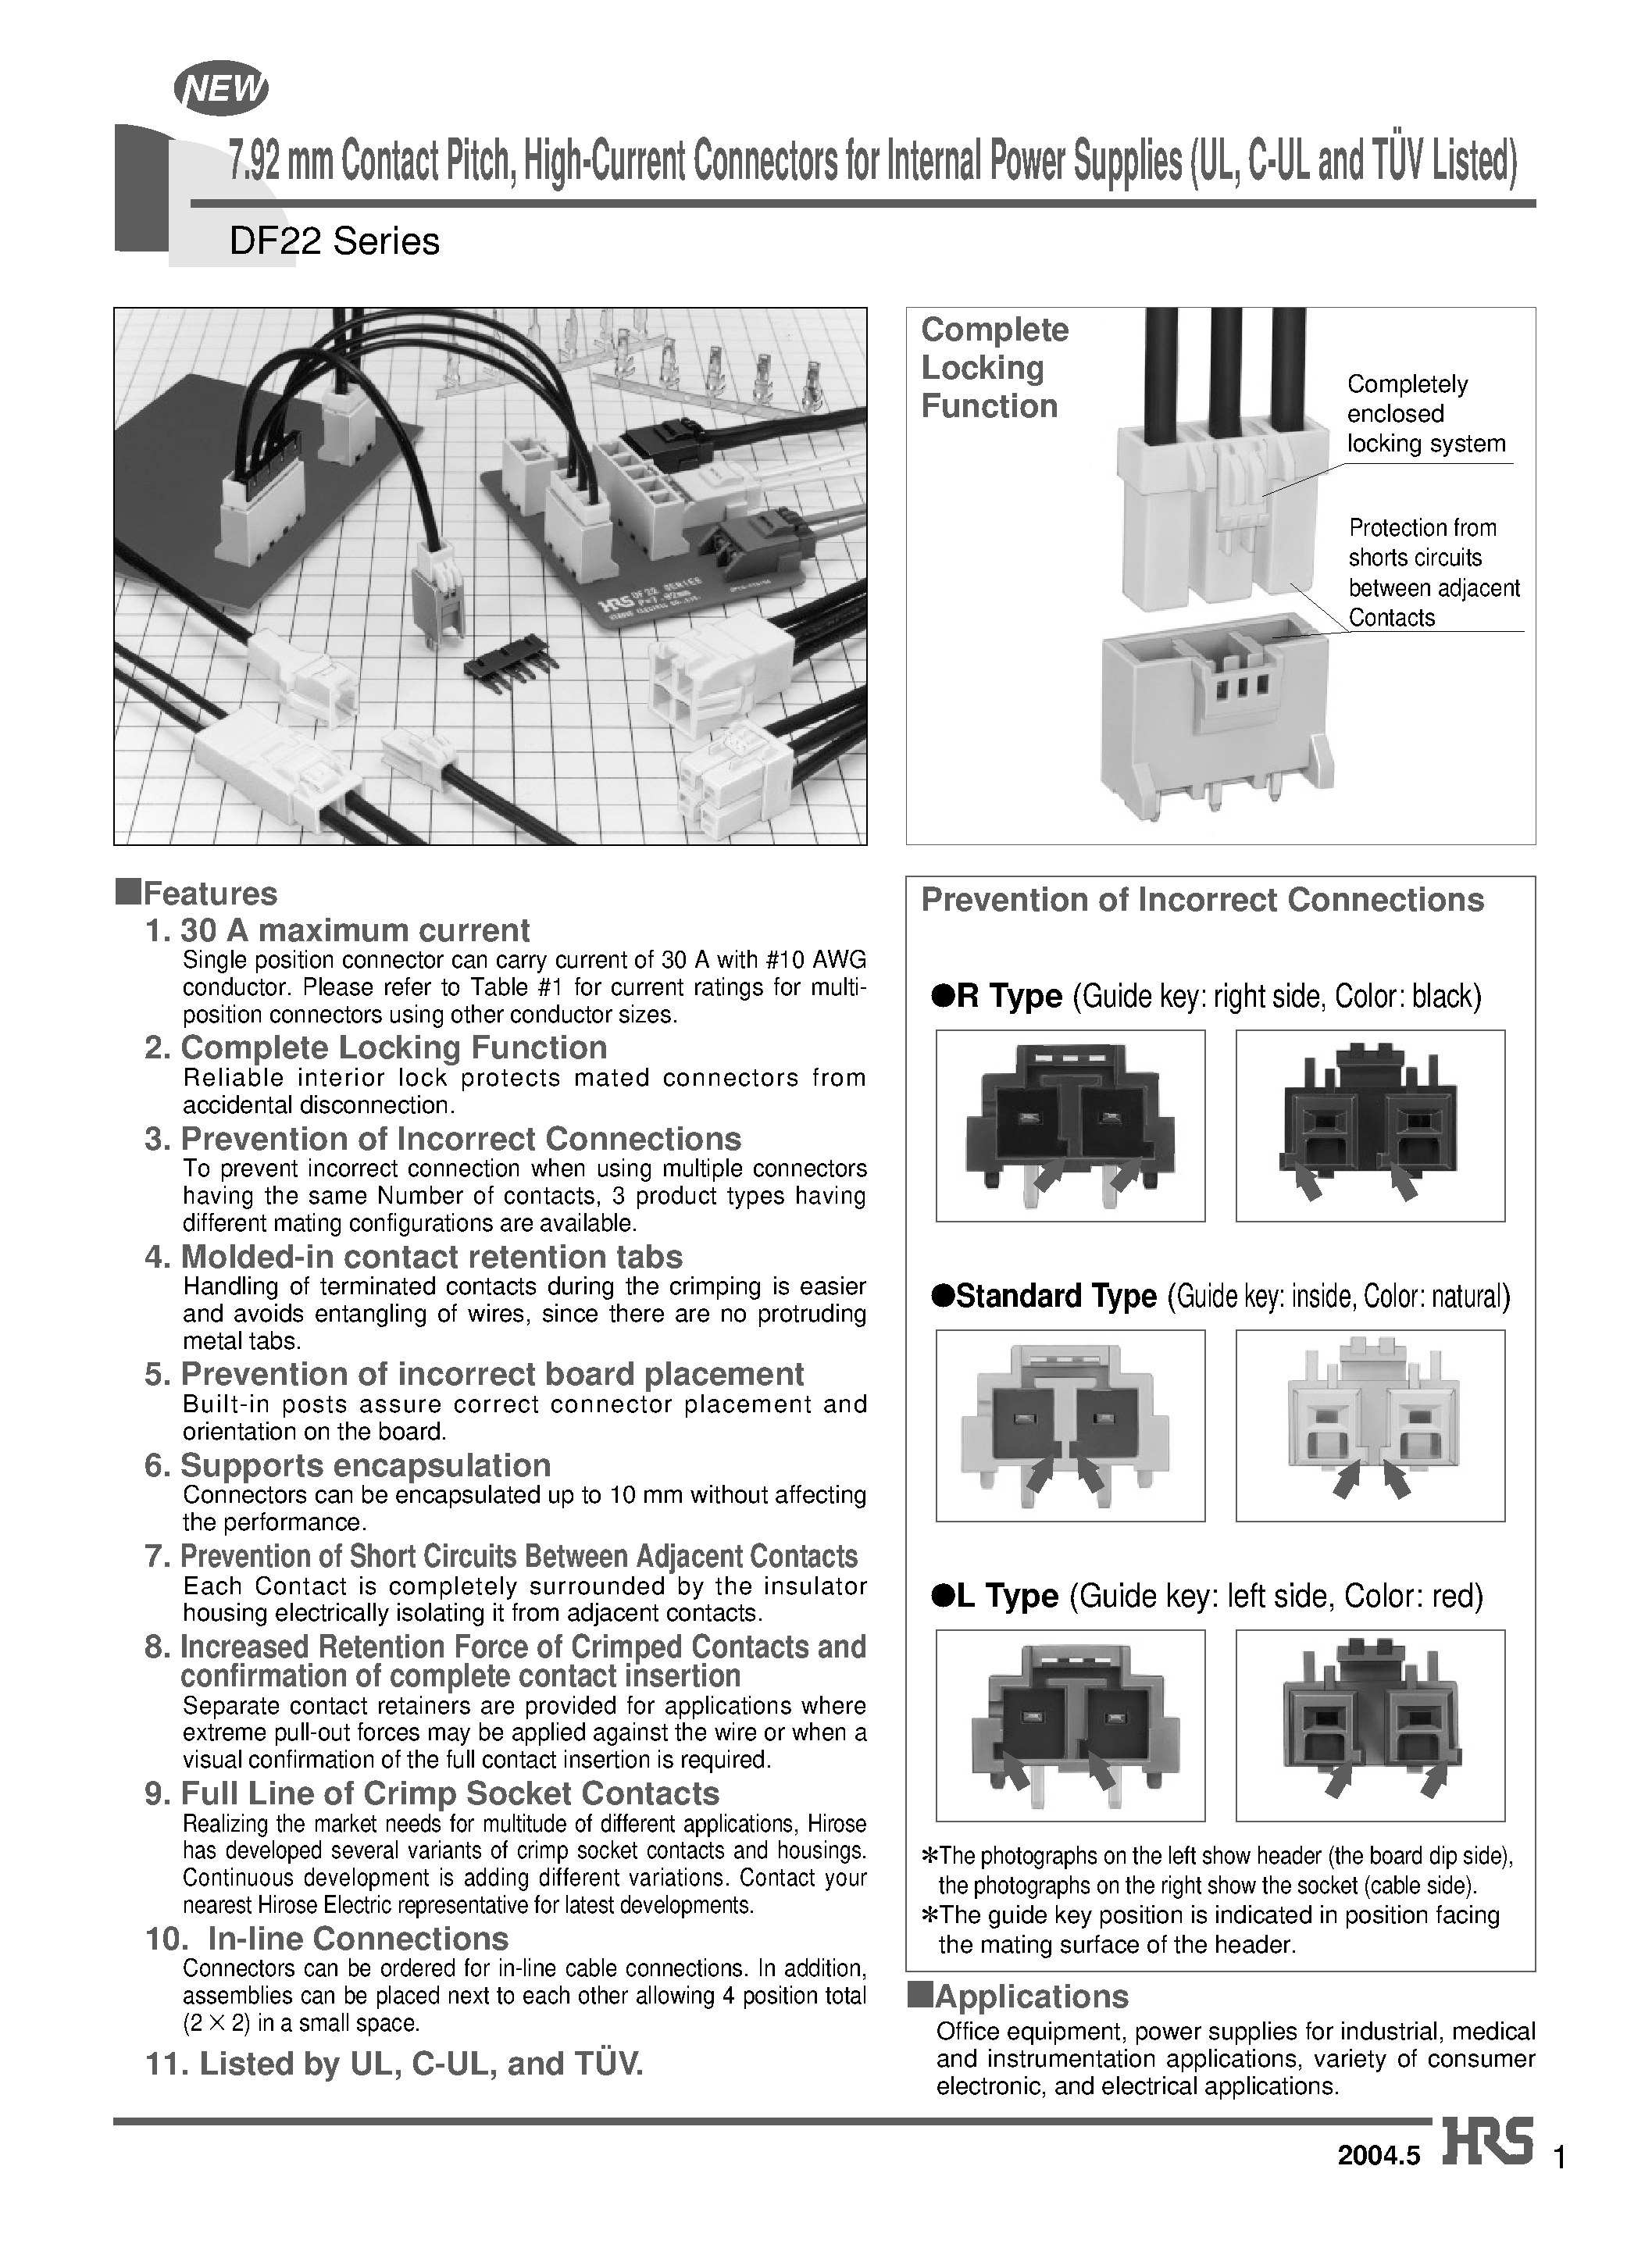 Даташит DF22AL-1S-7.92C - 7.92 mm Contact Pitch/ High-Current Connectors for Internal Power Supplies (UL/ C-UL and TUV Listed) страница 1